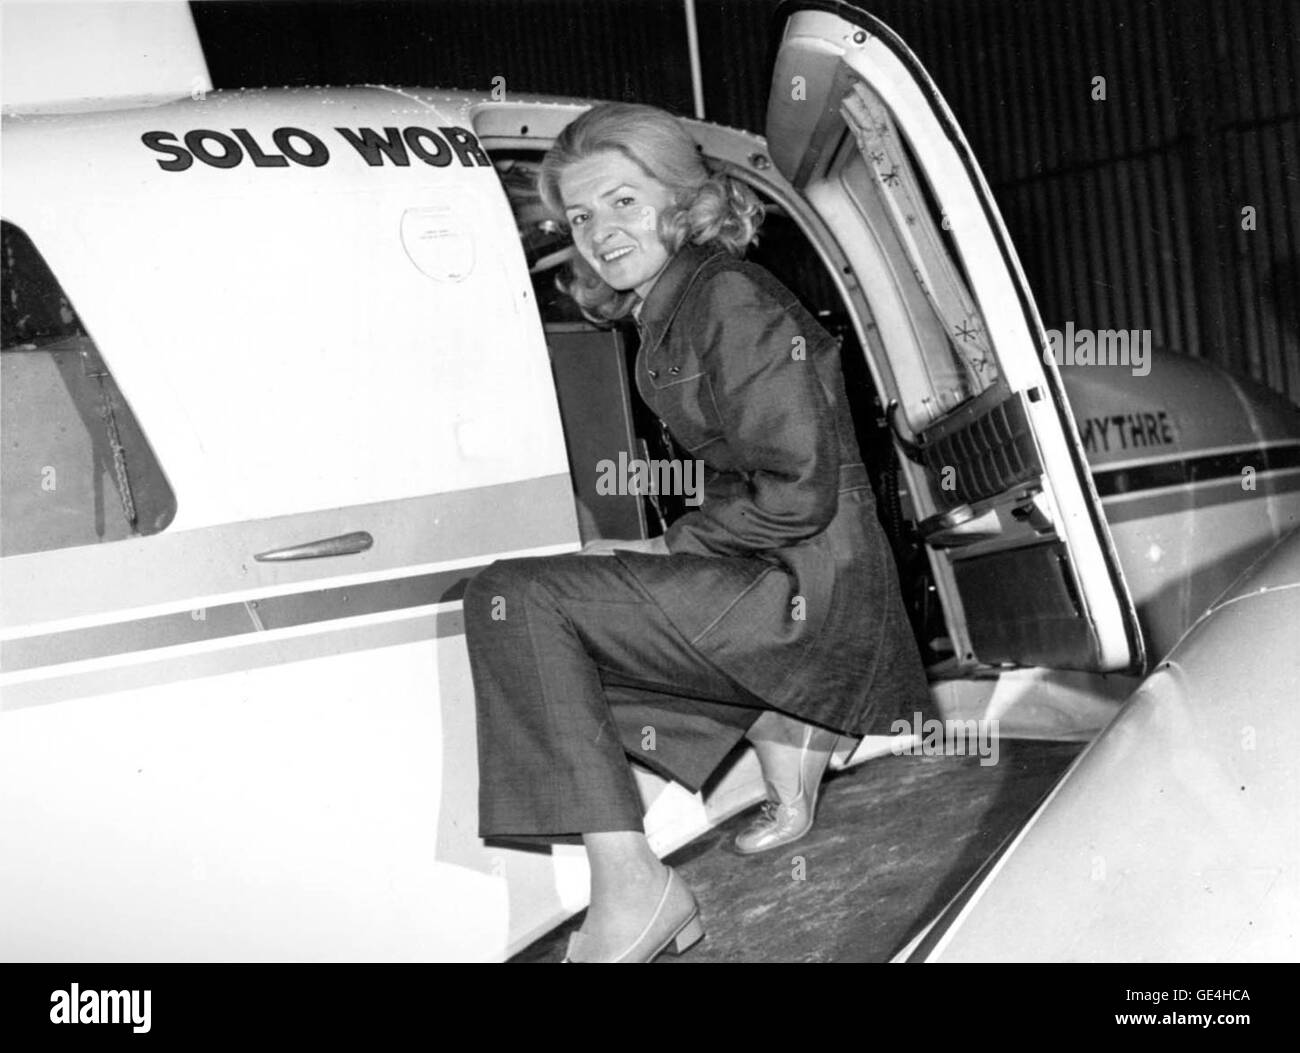 (Date Unknown) Sheila Scott, born on April 27, 1927 in London, England, served as governor of the British section of the Ninety-Nines, an international association of licensed women pilots. The Ninety- Nines originated as an association of American women pilots who first gathered on November 2, 1929 at Curtiss Field, Valley Stream, Long Island, New York. All 117 registered female pilots in America at the time were invited, out of which twenty-six attended the first meeting and 99 became charter members dedicated to mutual support and the advancement of aviation. Under the leadership of Amelia  Stock Photo